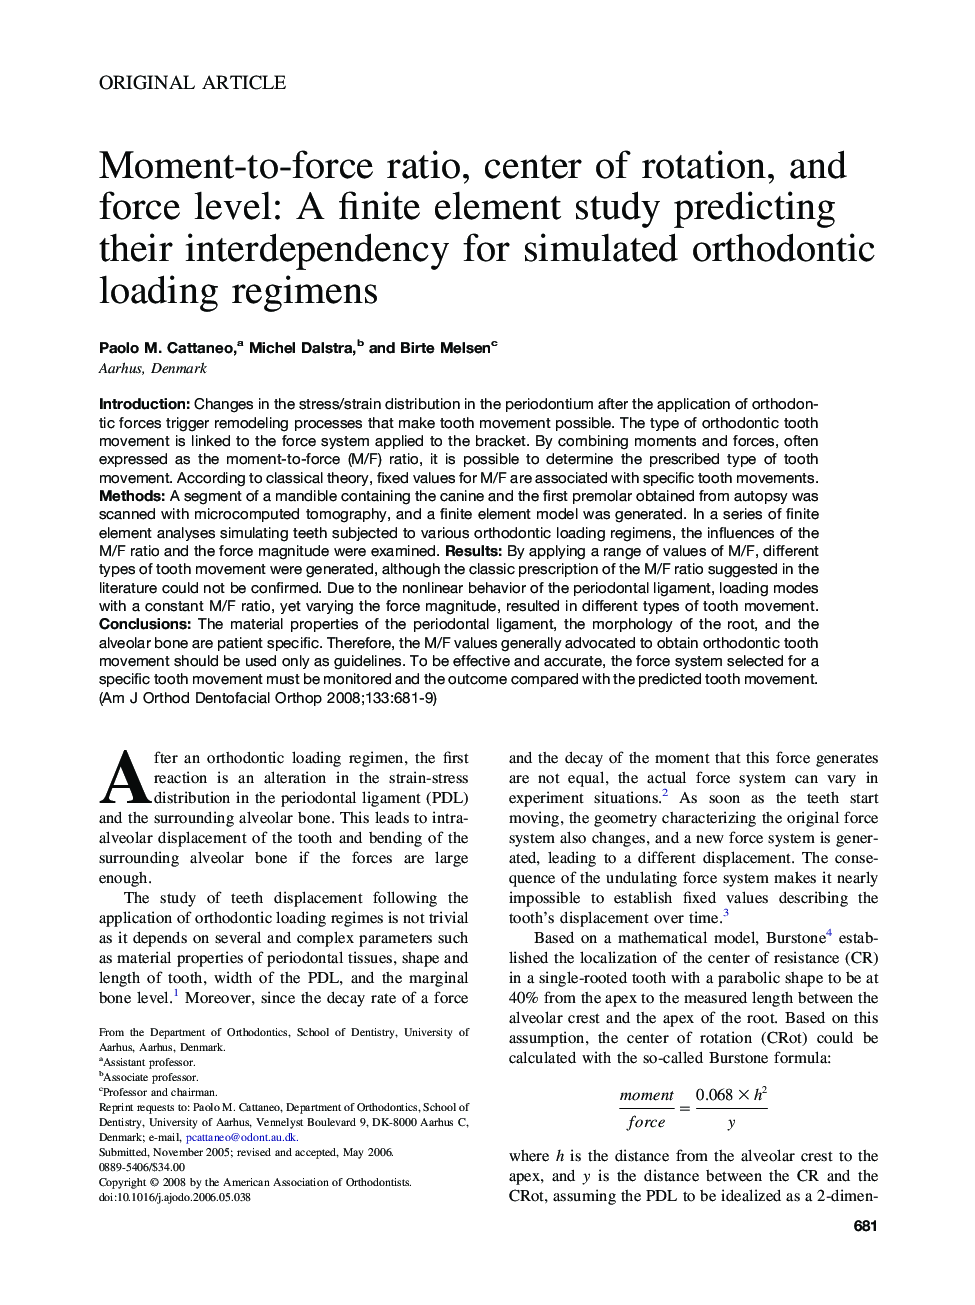 Moment-to-force ratio, center of rotation, and force level: A finite element study predicting their interdependency for simulated orthodontic loading regimens